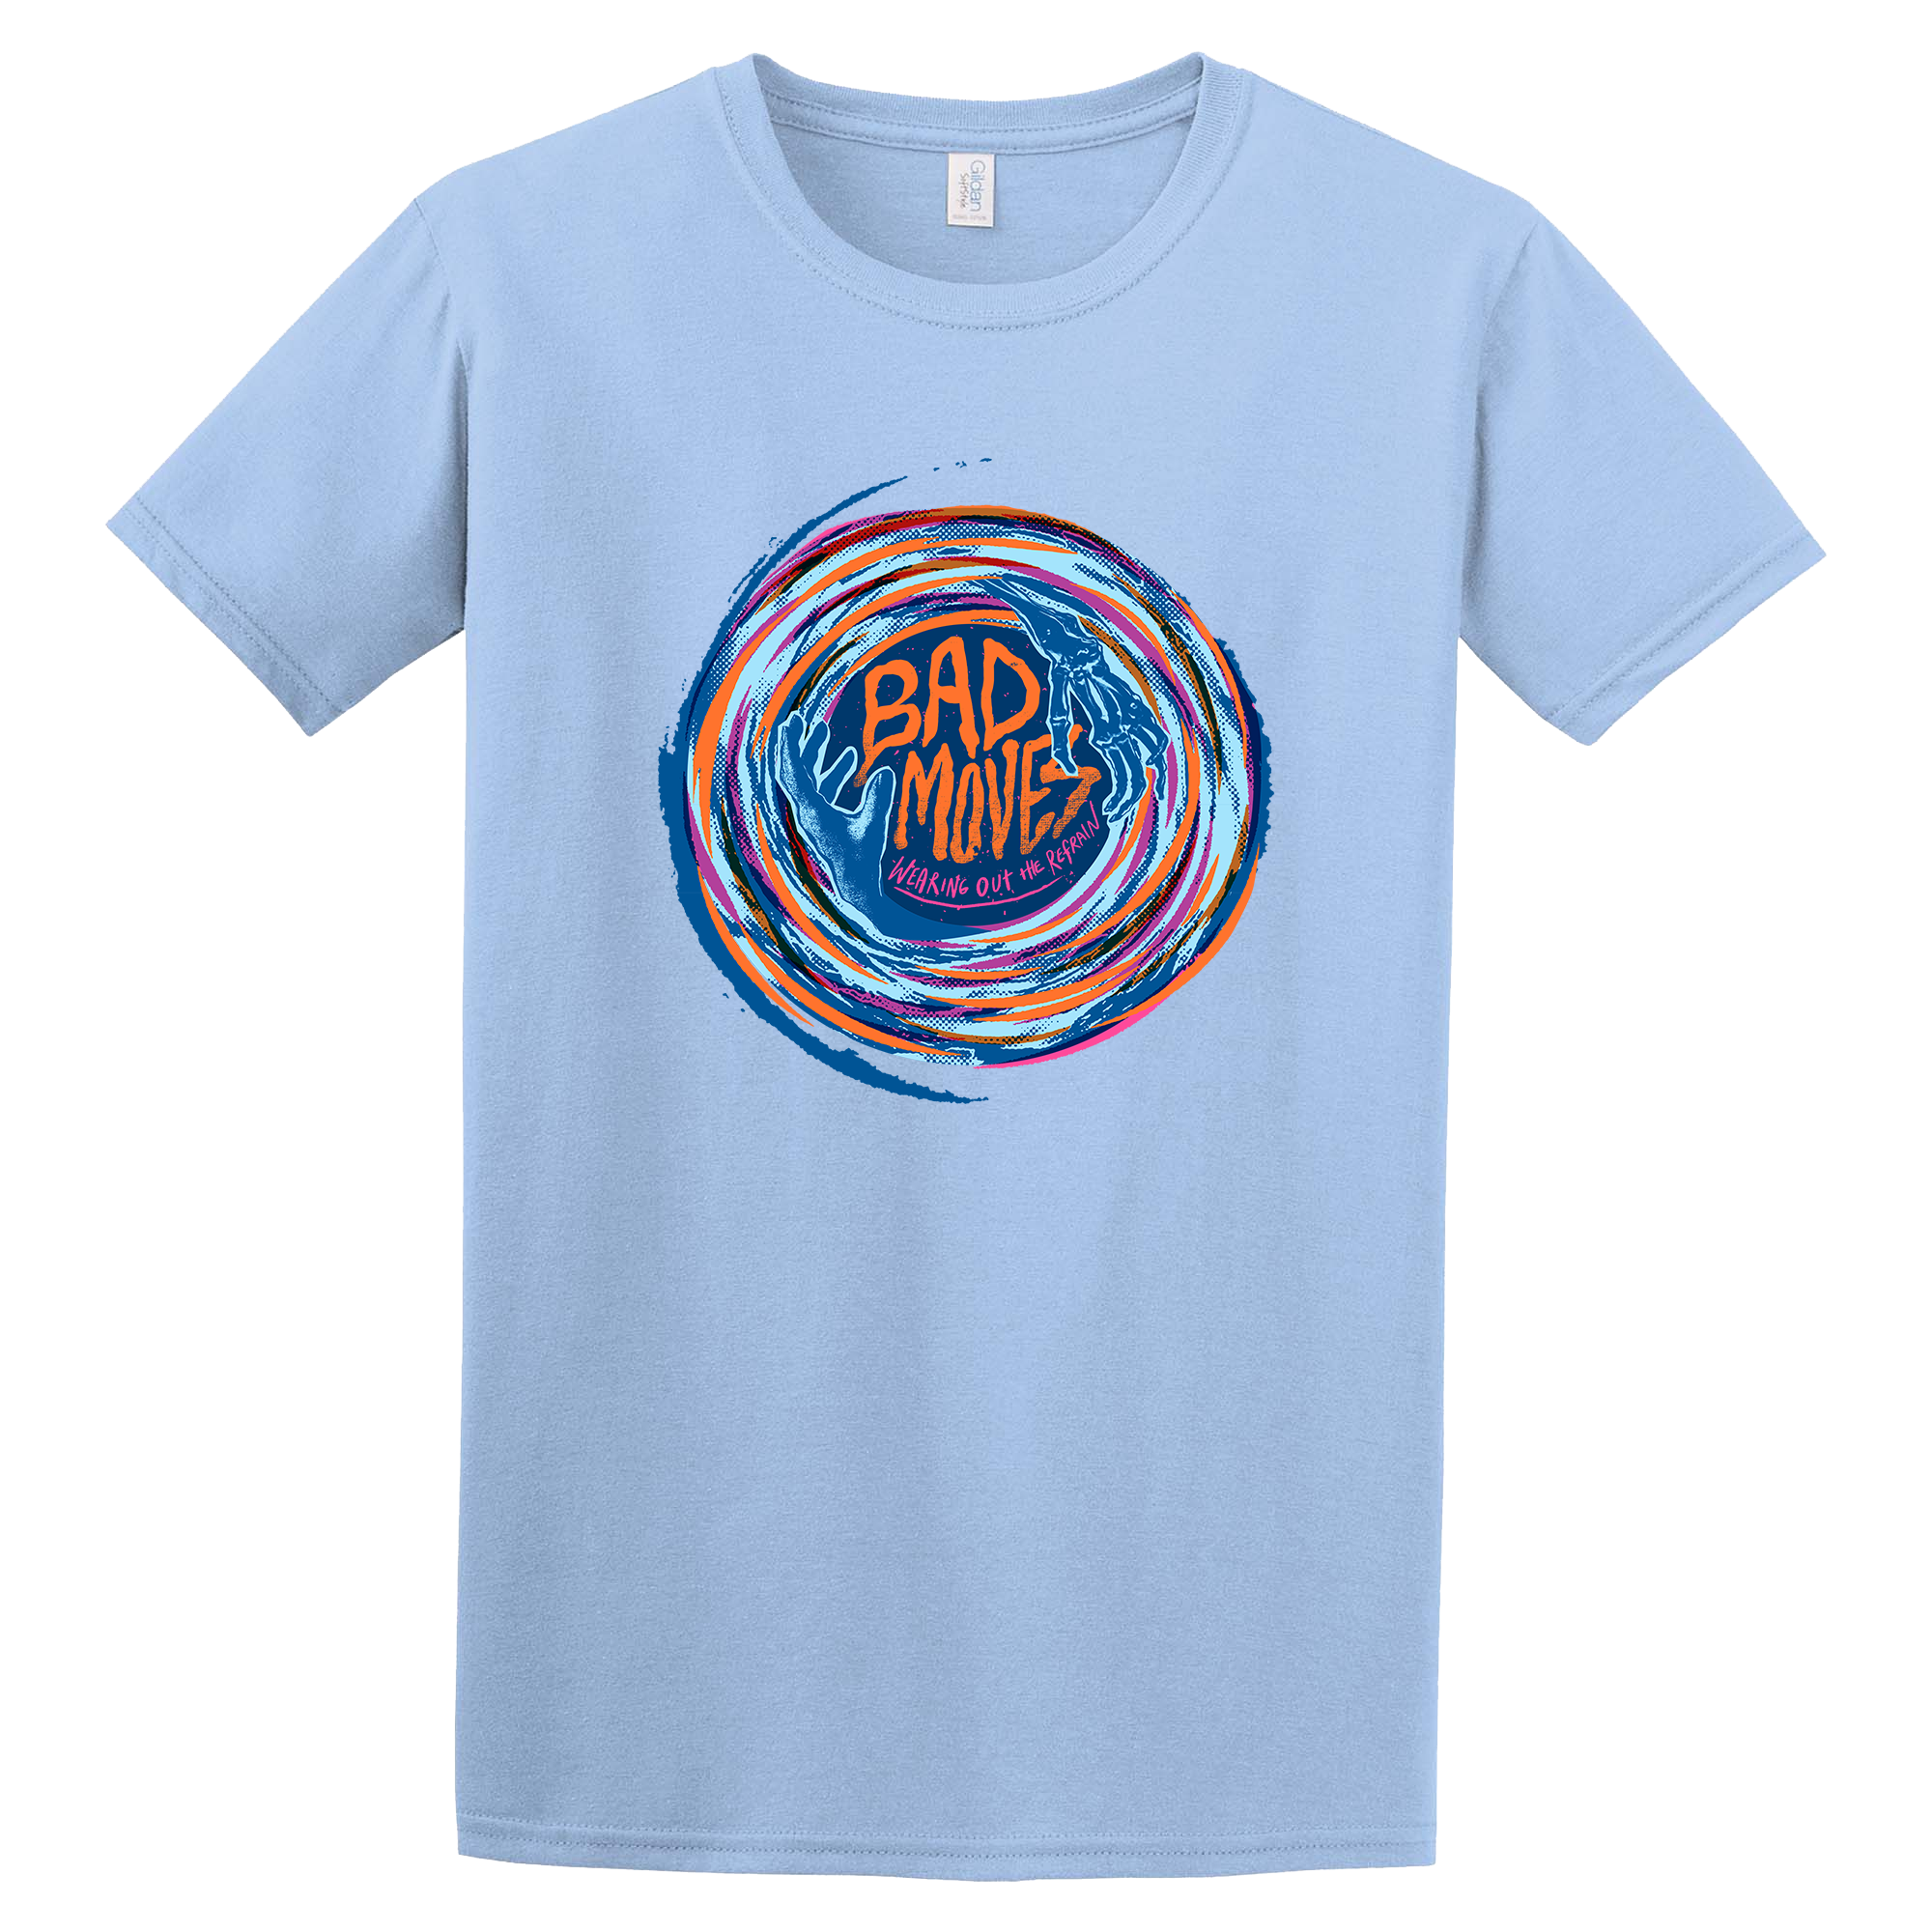 Bad Moves "Wearing Out The Refrain" T-Shirt